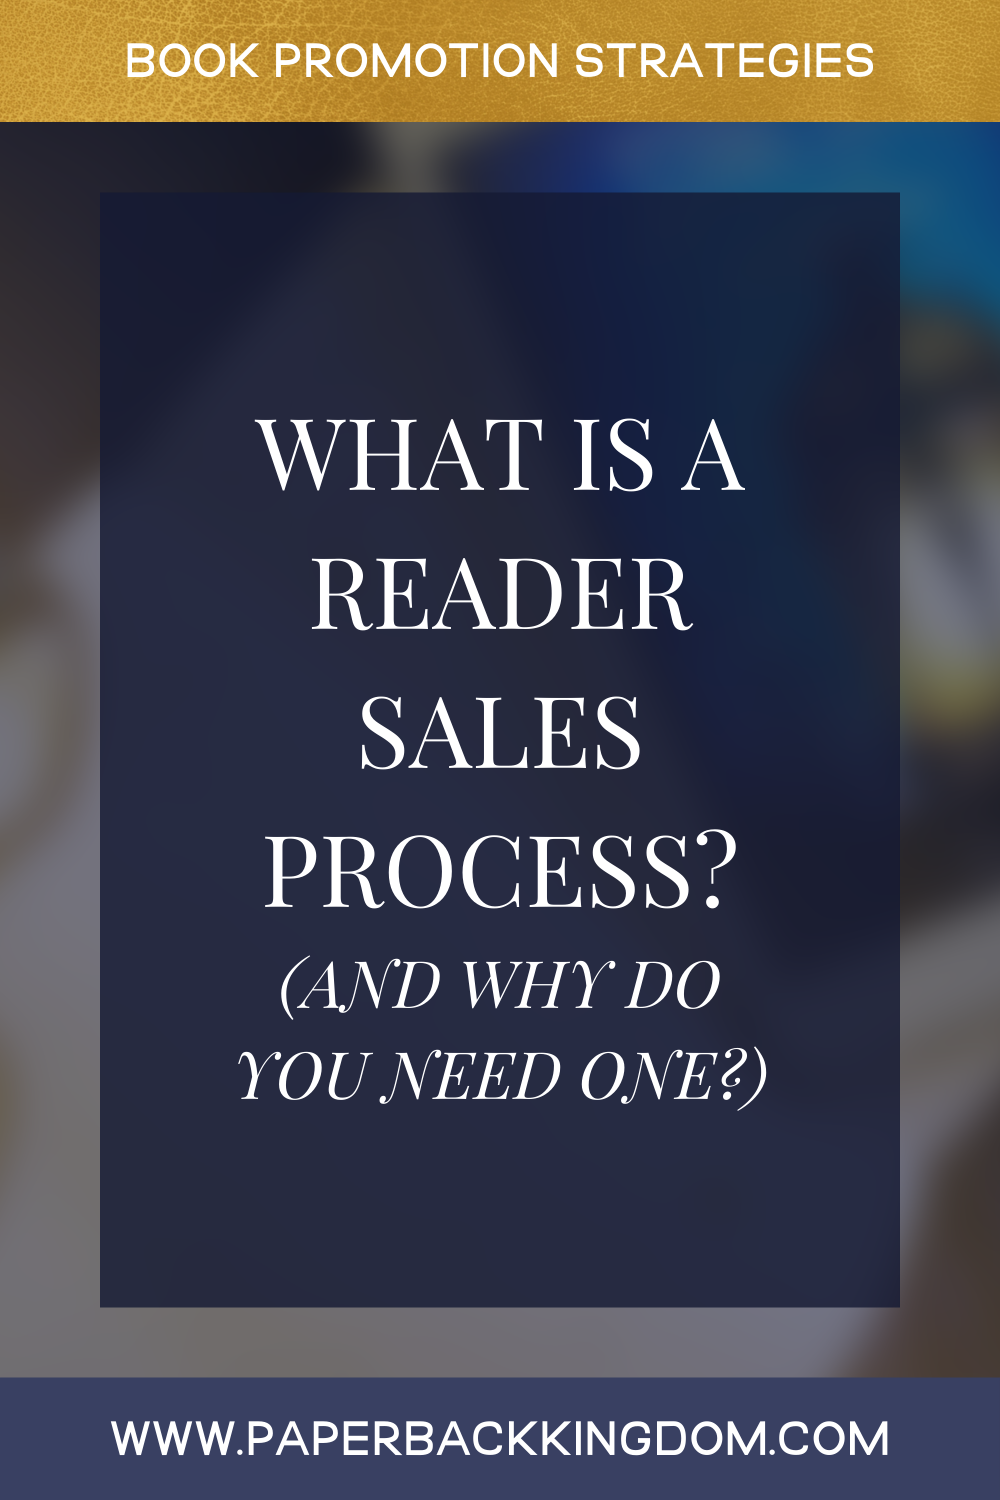 What Is A Reader Sales Process (And Why Do You Need One?) - When I teach any form of book marketing and business to authors, I’m always trying to take them through a sales process (Attract, Nurture, Close) so that they can attract in readers, warm them up to buy, and close more book sales. In this post, I explain what a reader sales process is and how it can help you sell more books.